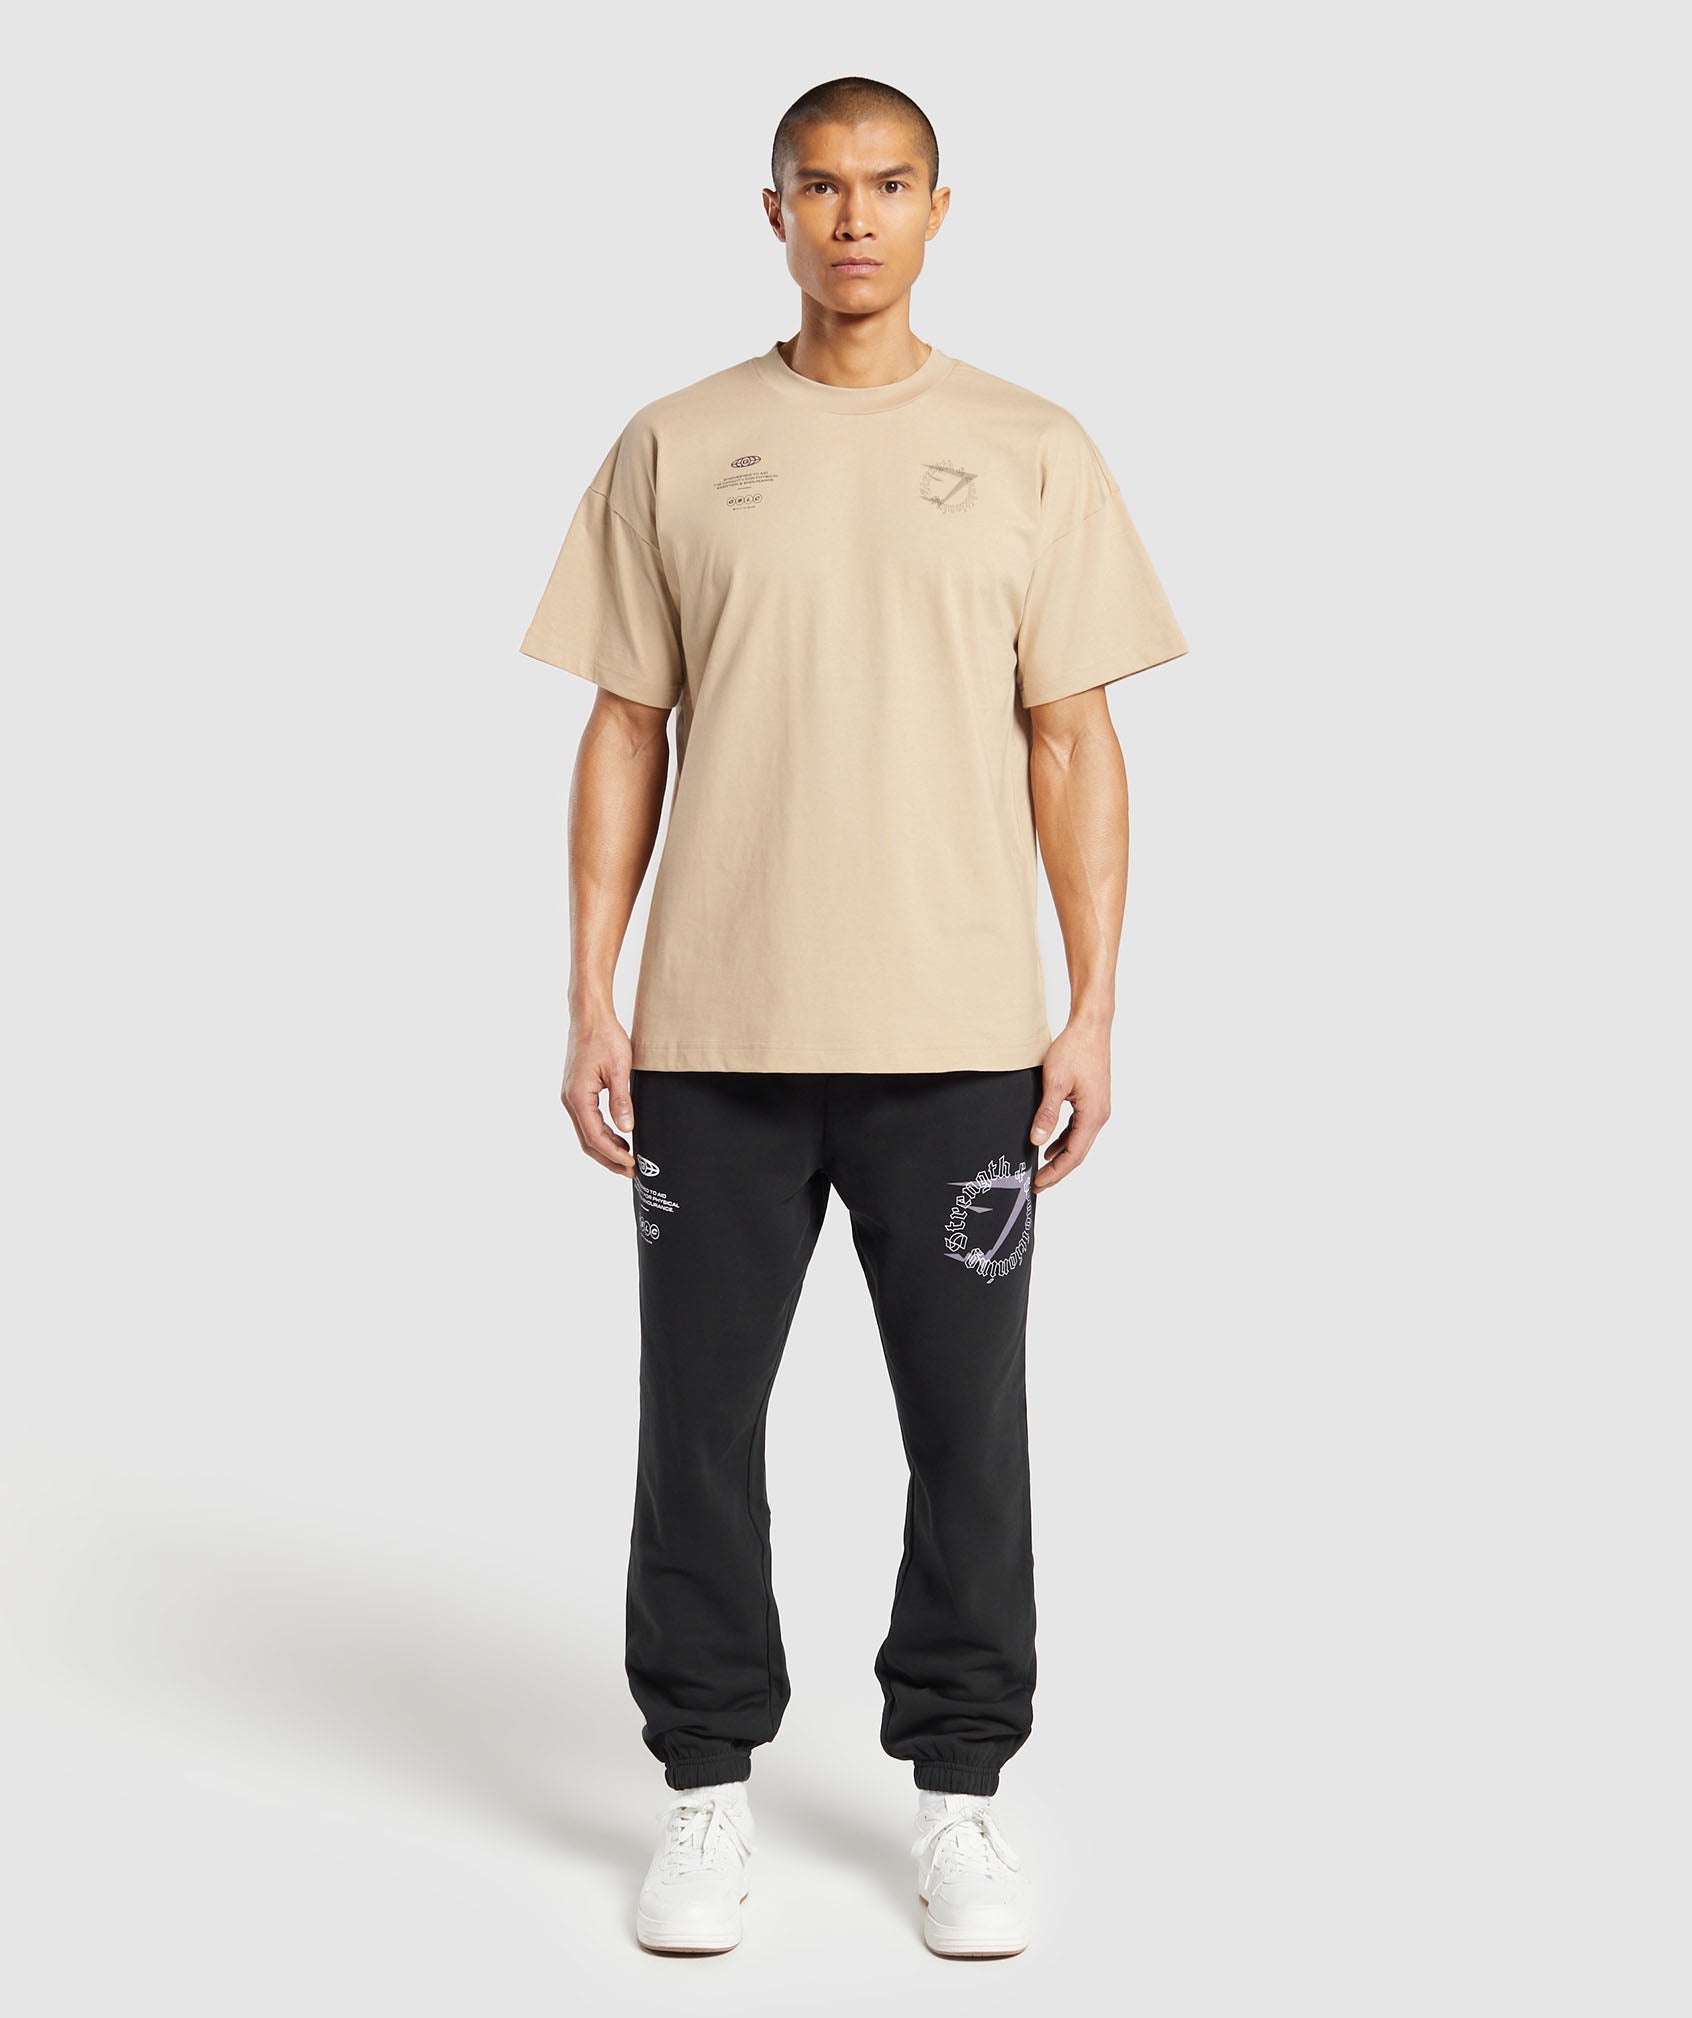 Strength and Conditioning T-Shirt in Vanilla Beige - view 4